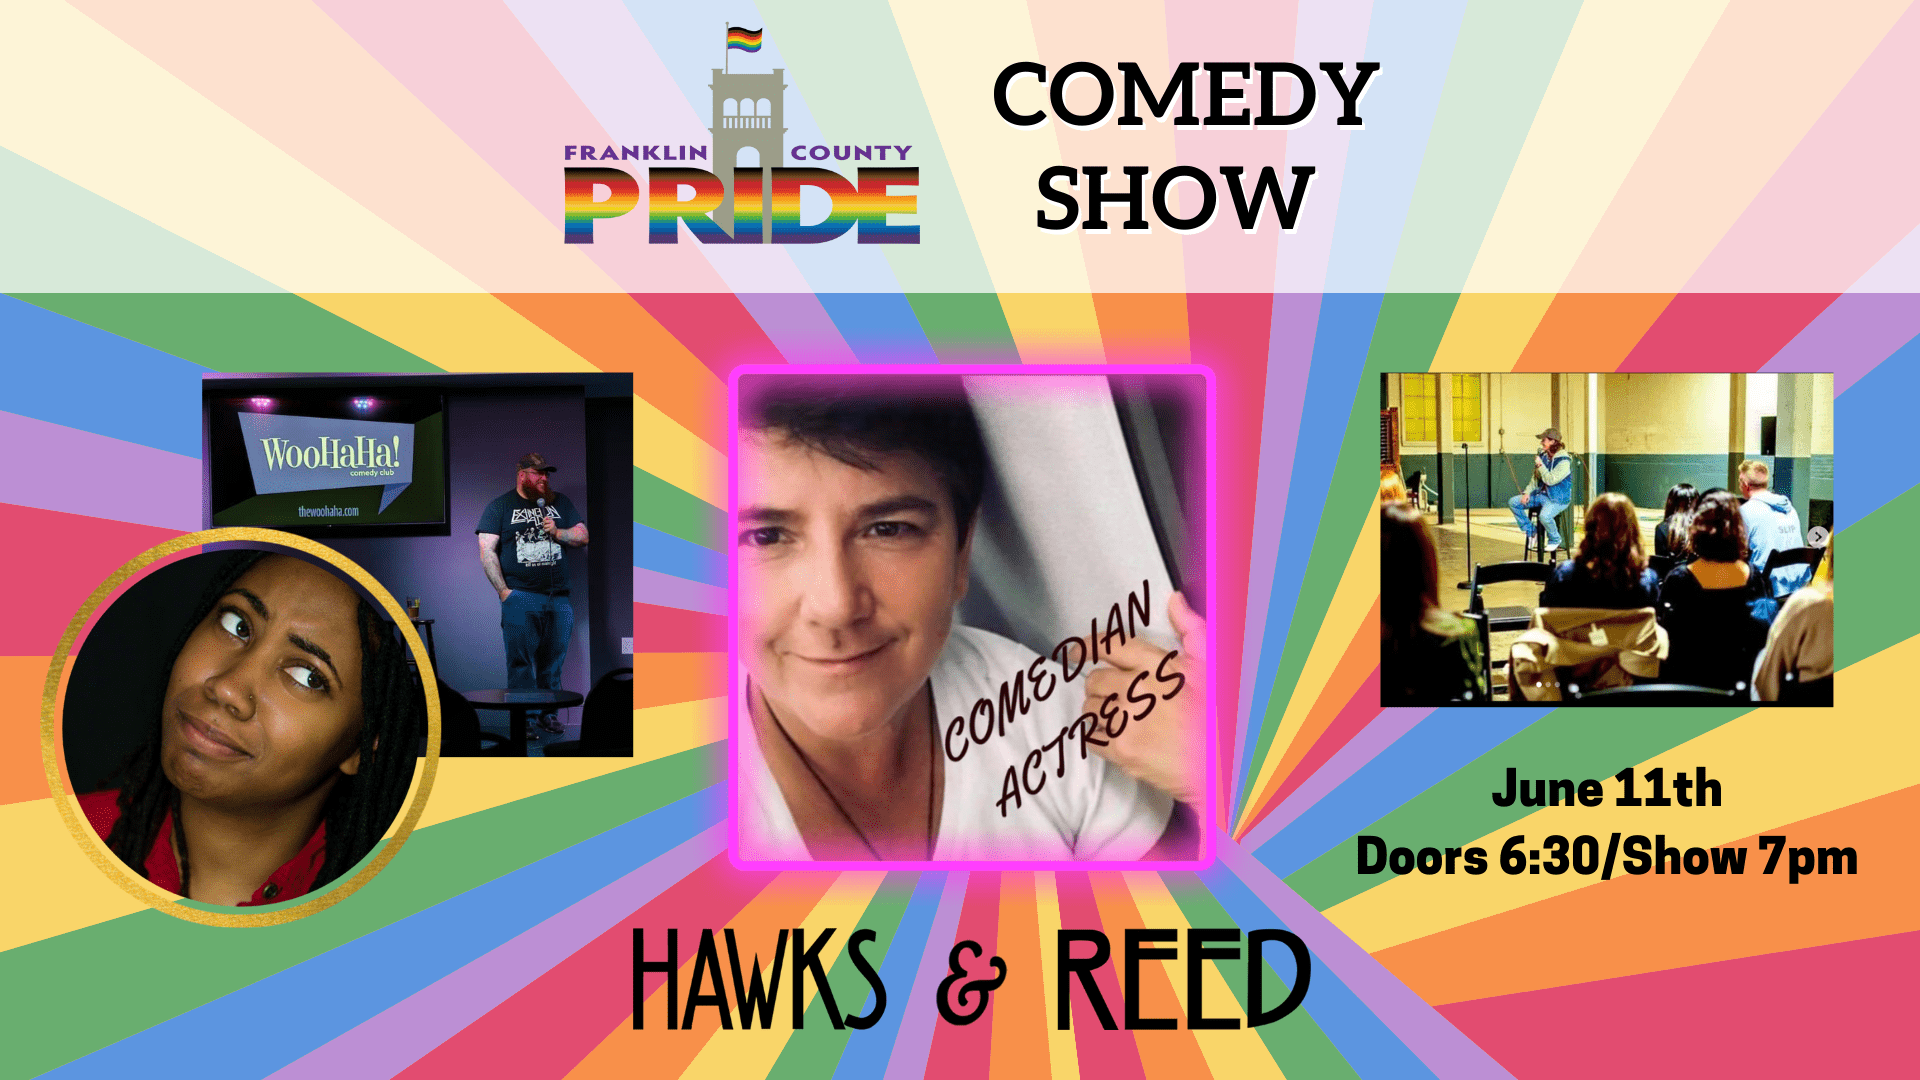 PRIDE Comedy Show at Hawks and Reed!